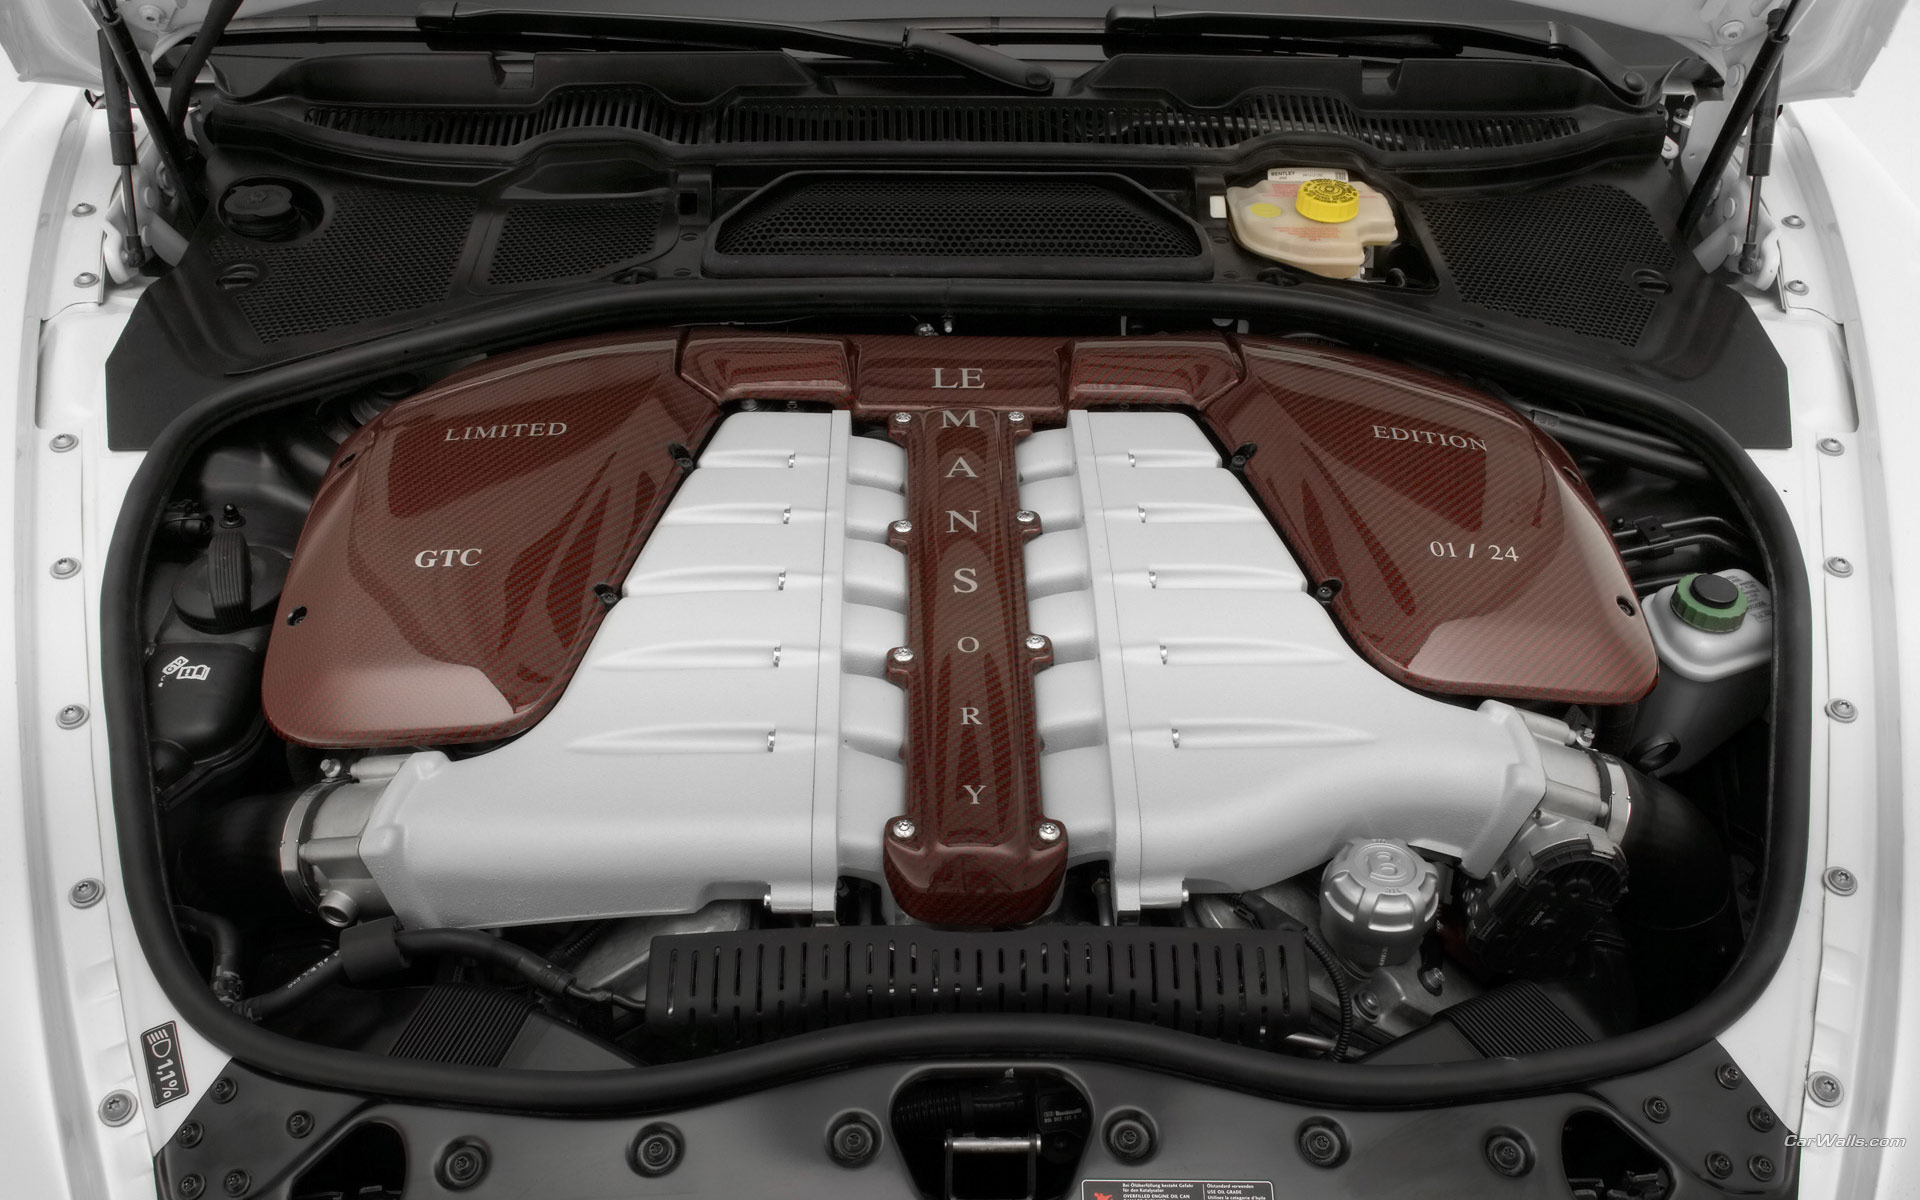 Download full size continental GTC engine Bentley wallpaper / 1920x1200